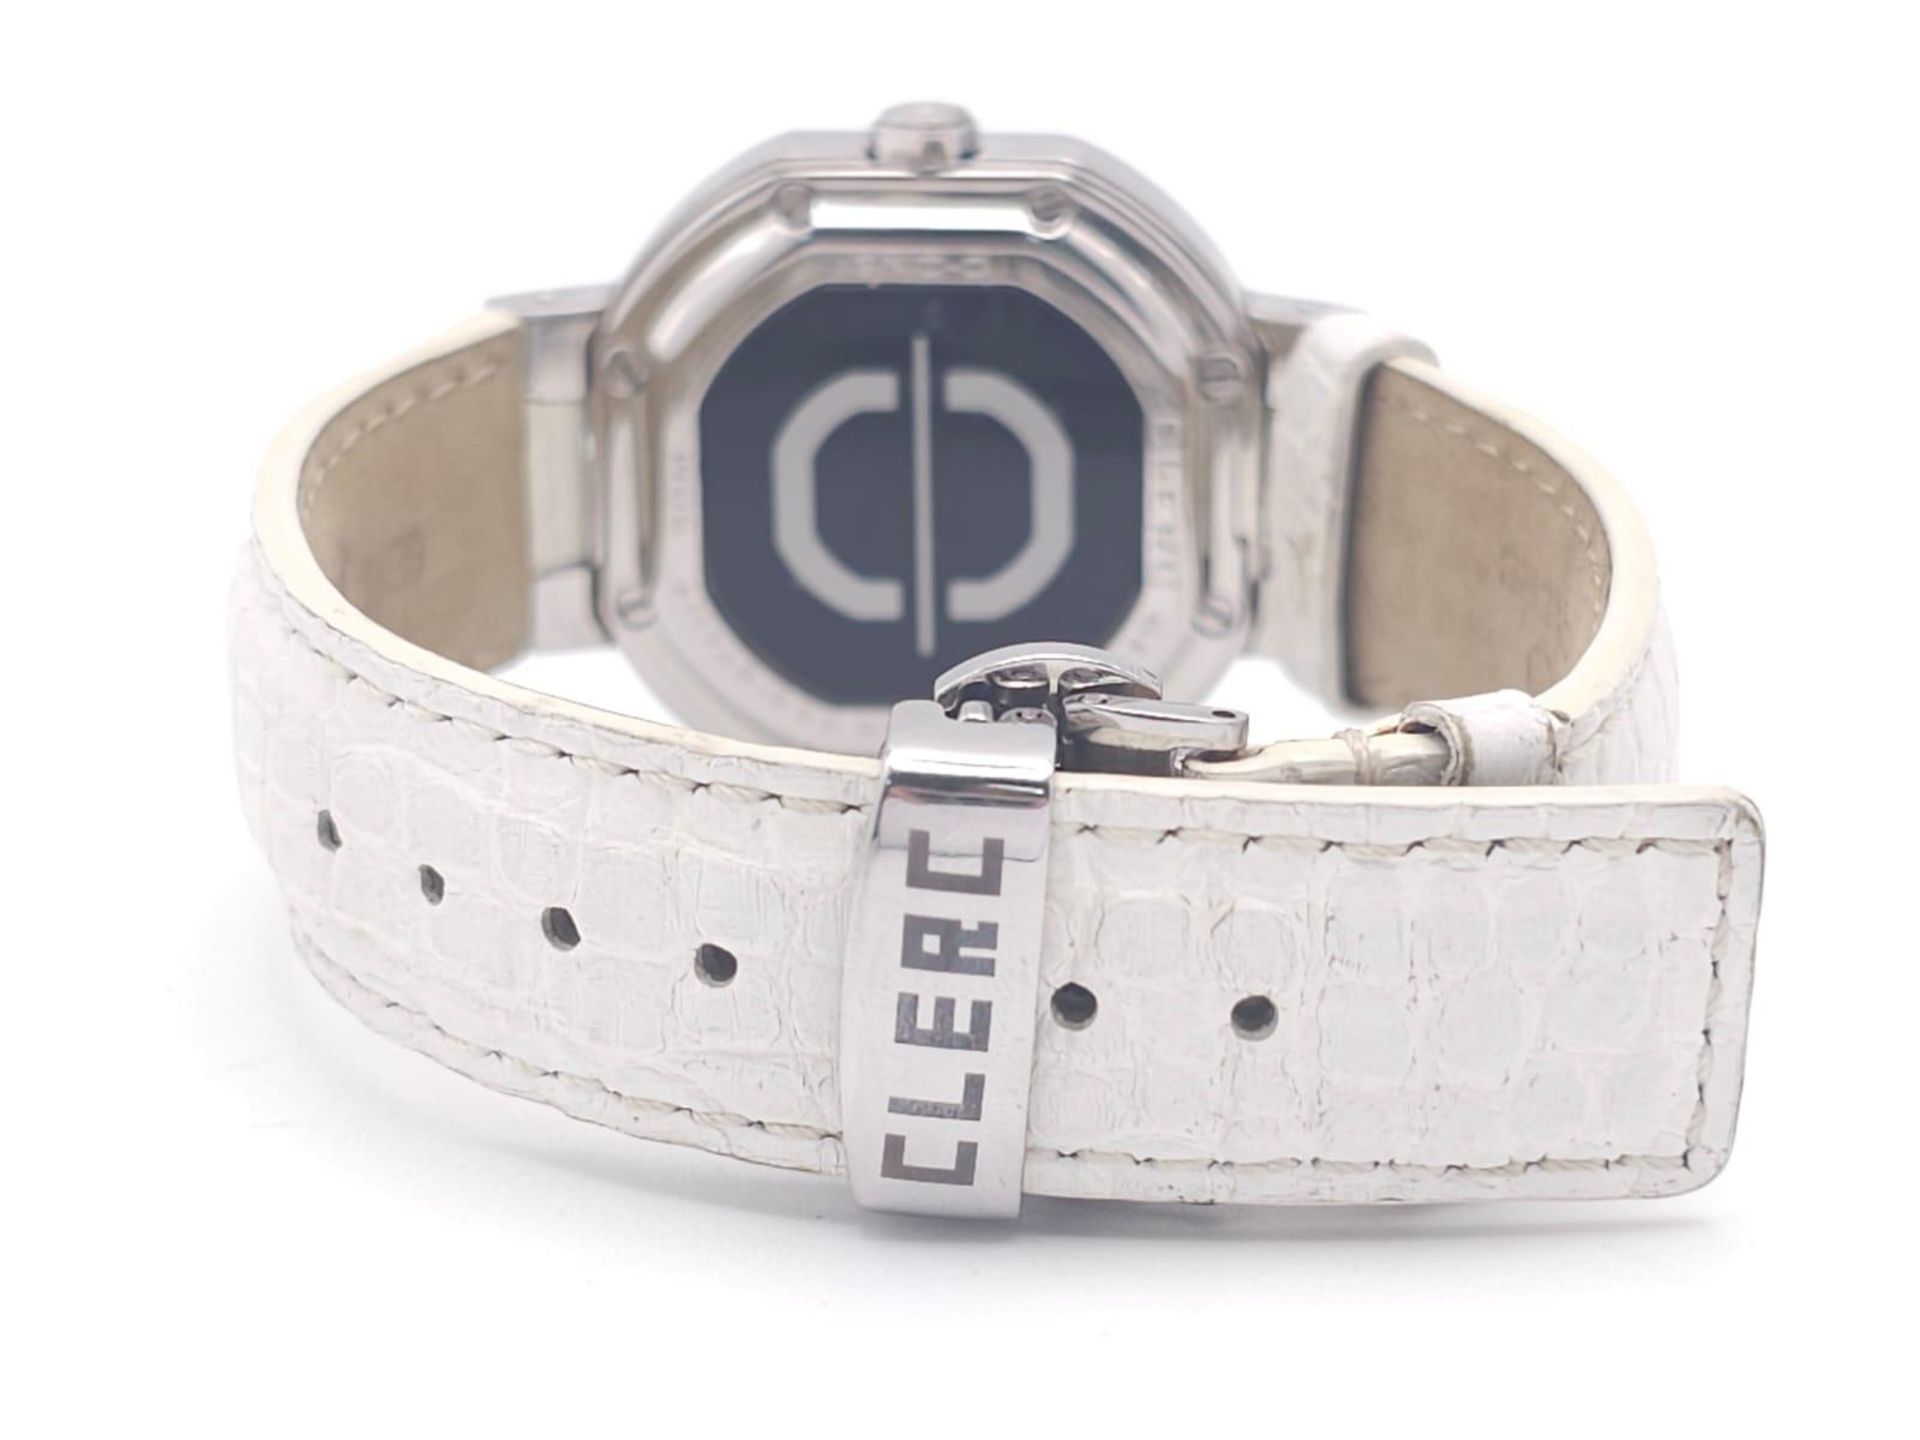 A Clerc C-One Designer Swiss Quartz Gents Watch. White leather strap. Stainless steel case - 36mm. - Image 5 of 10